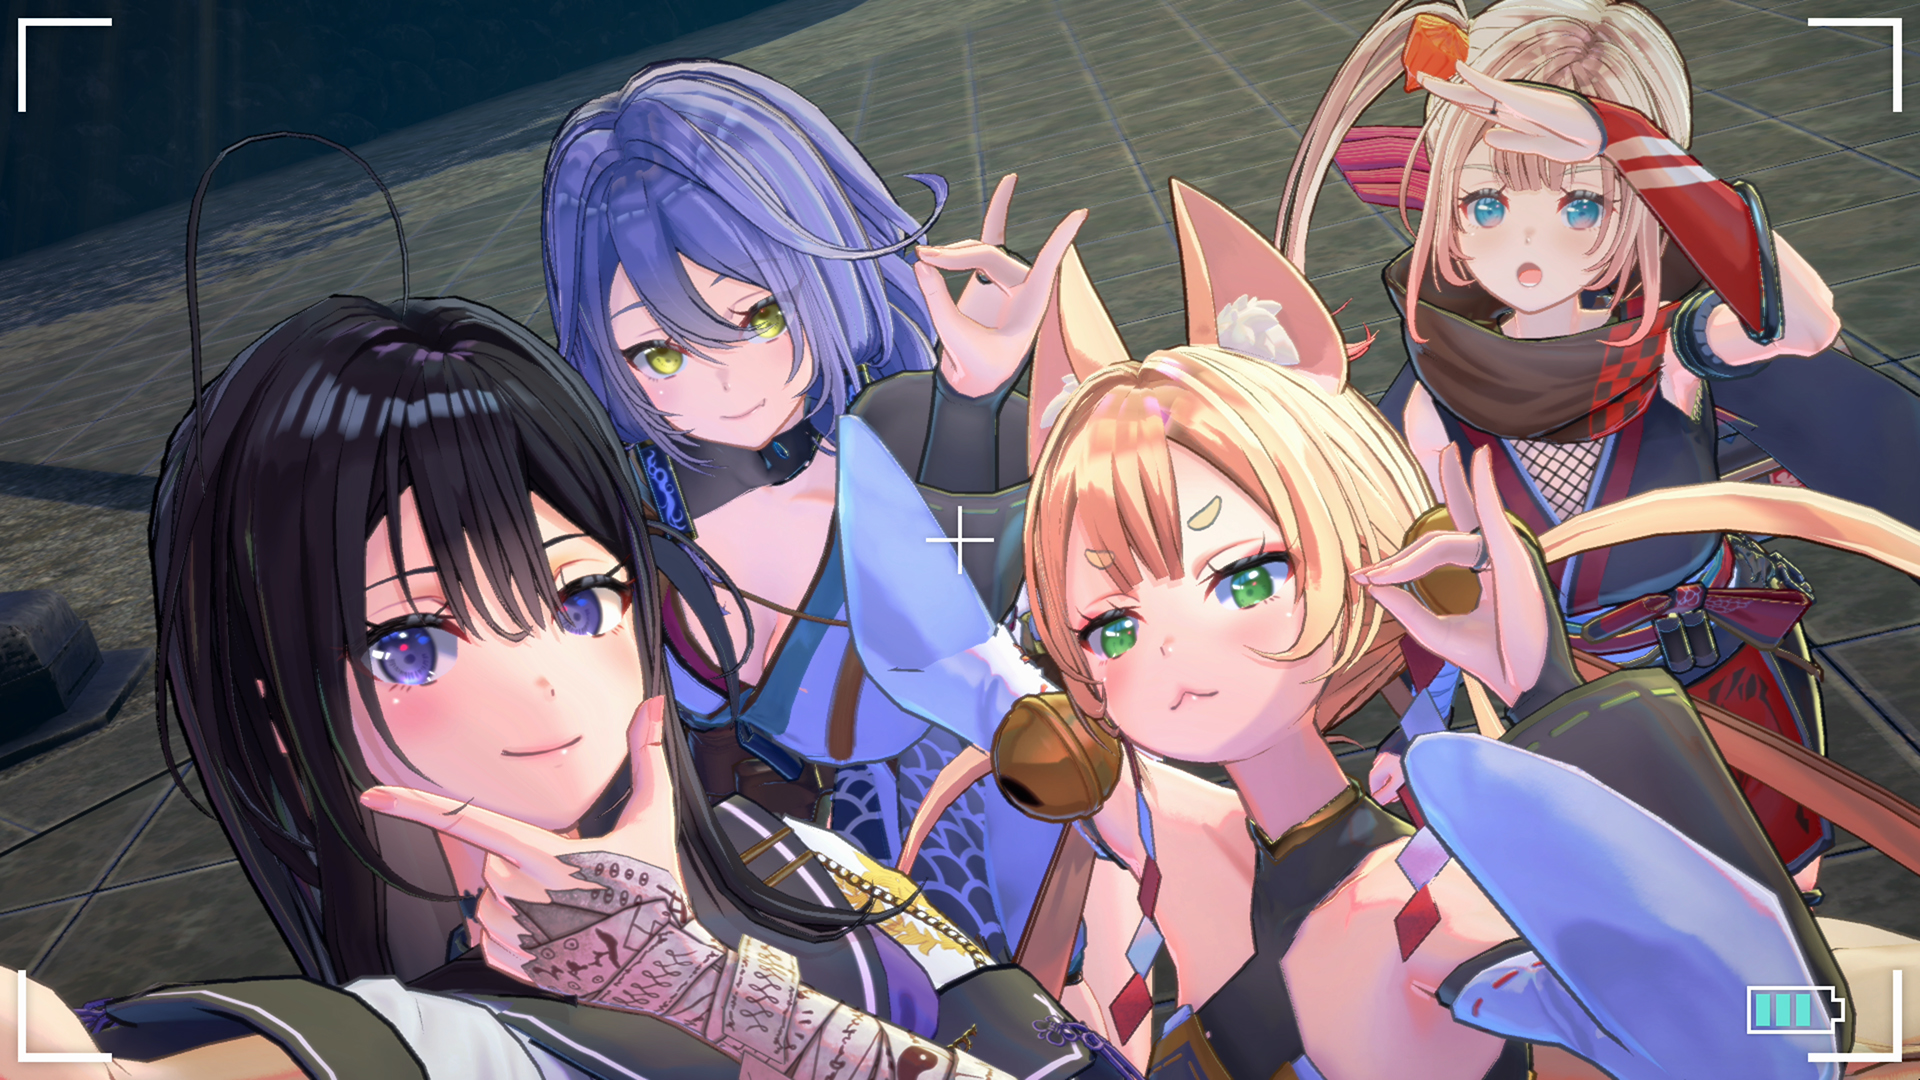 Four girls are taking a selfie in this screenshot from Samurai Maiden.